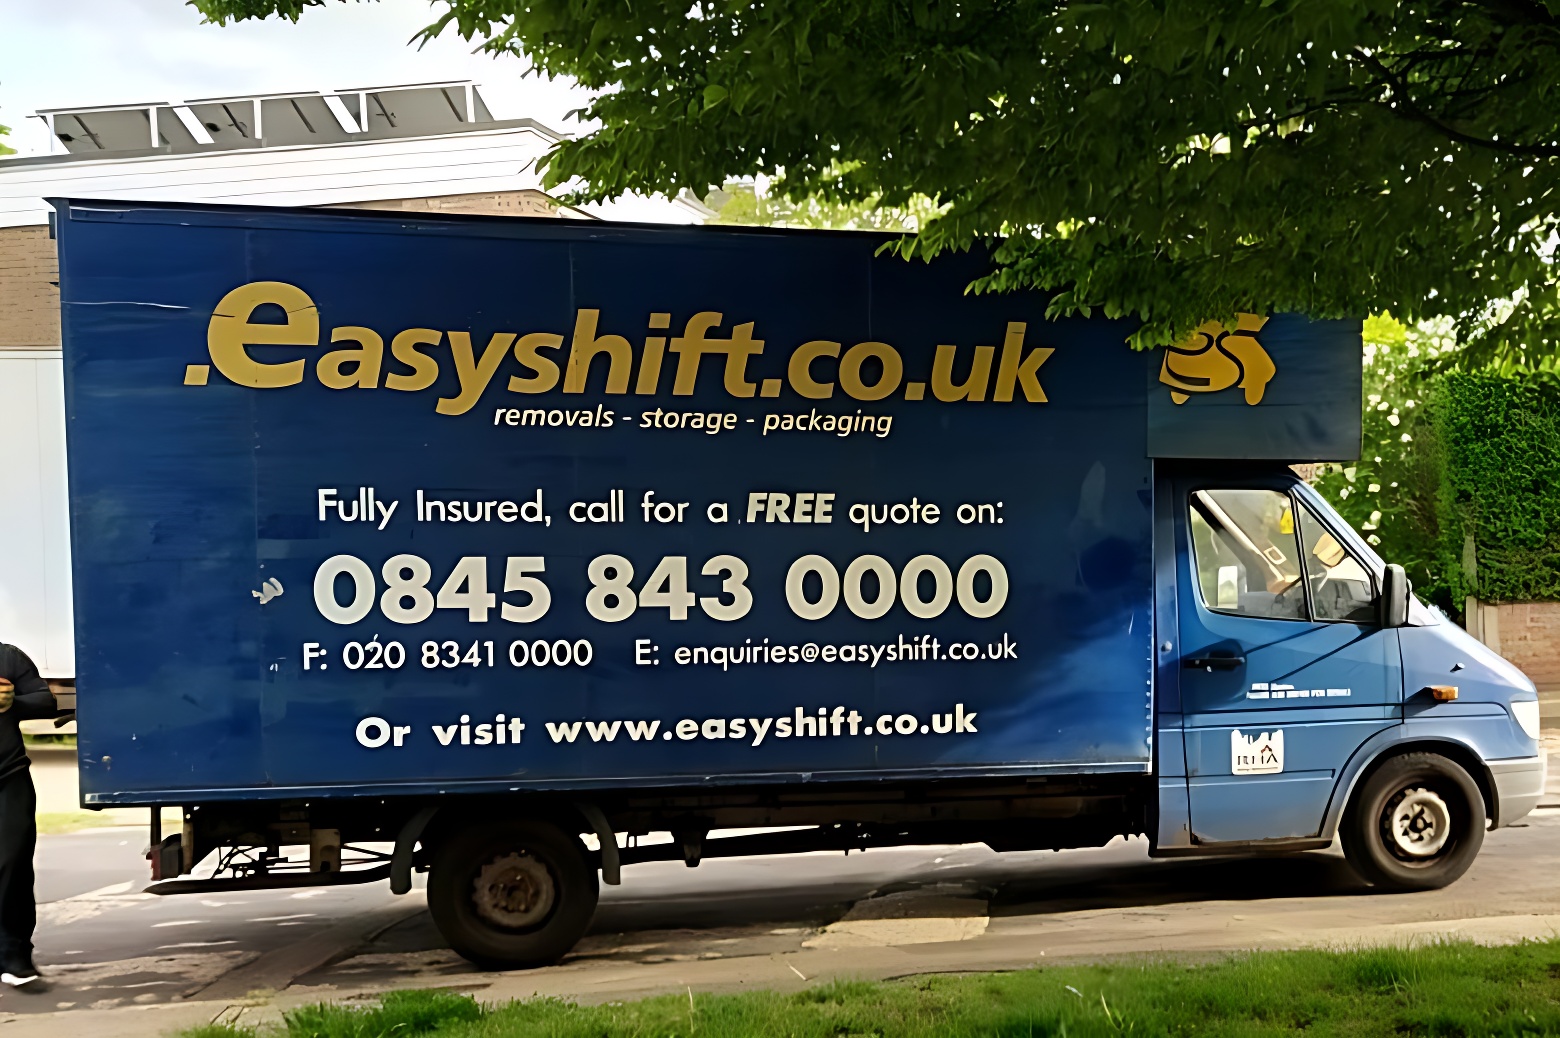 Easyshift of Crouch End Quality Removals and Affordable Storage BBB London